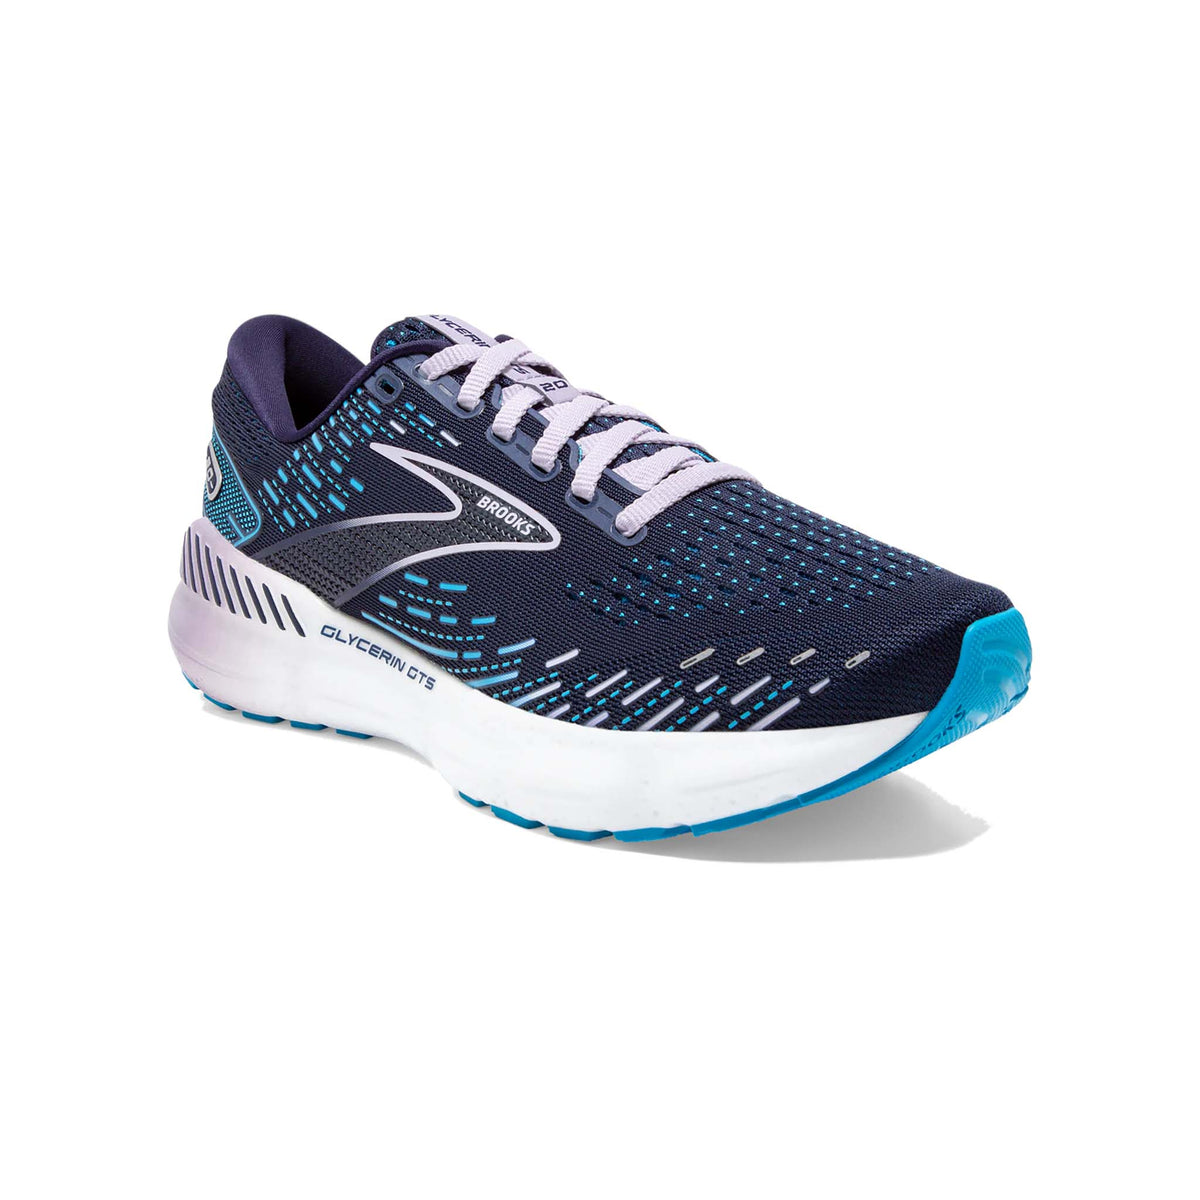 Brooks Glycerin GTS 20 chaussures de course a pied femme peacoat ocean lilac pointe